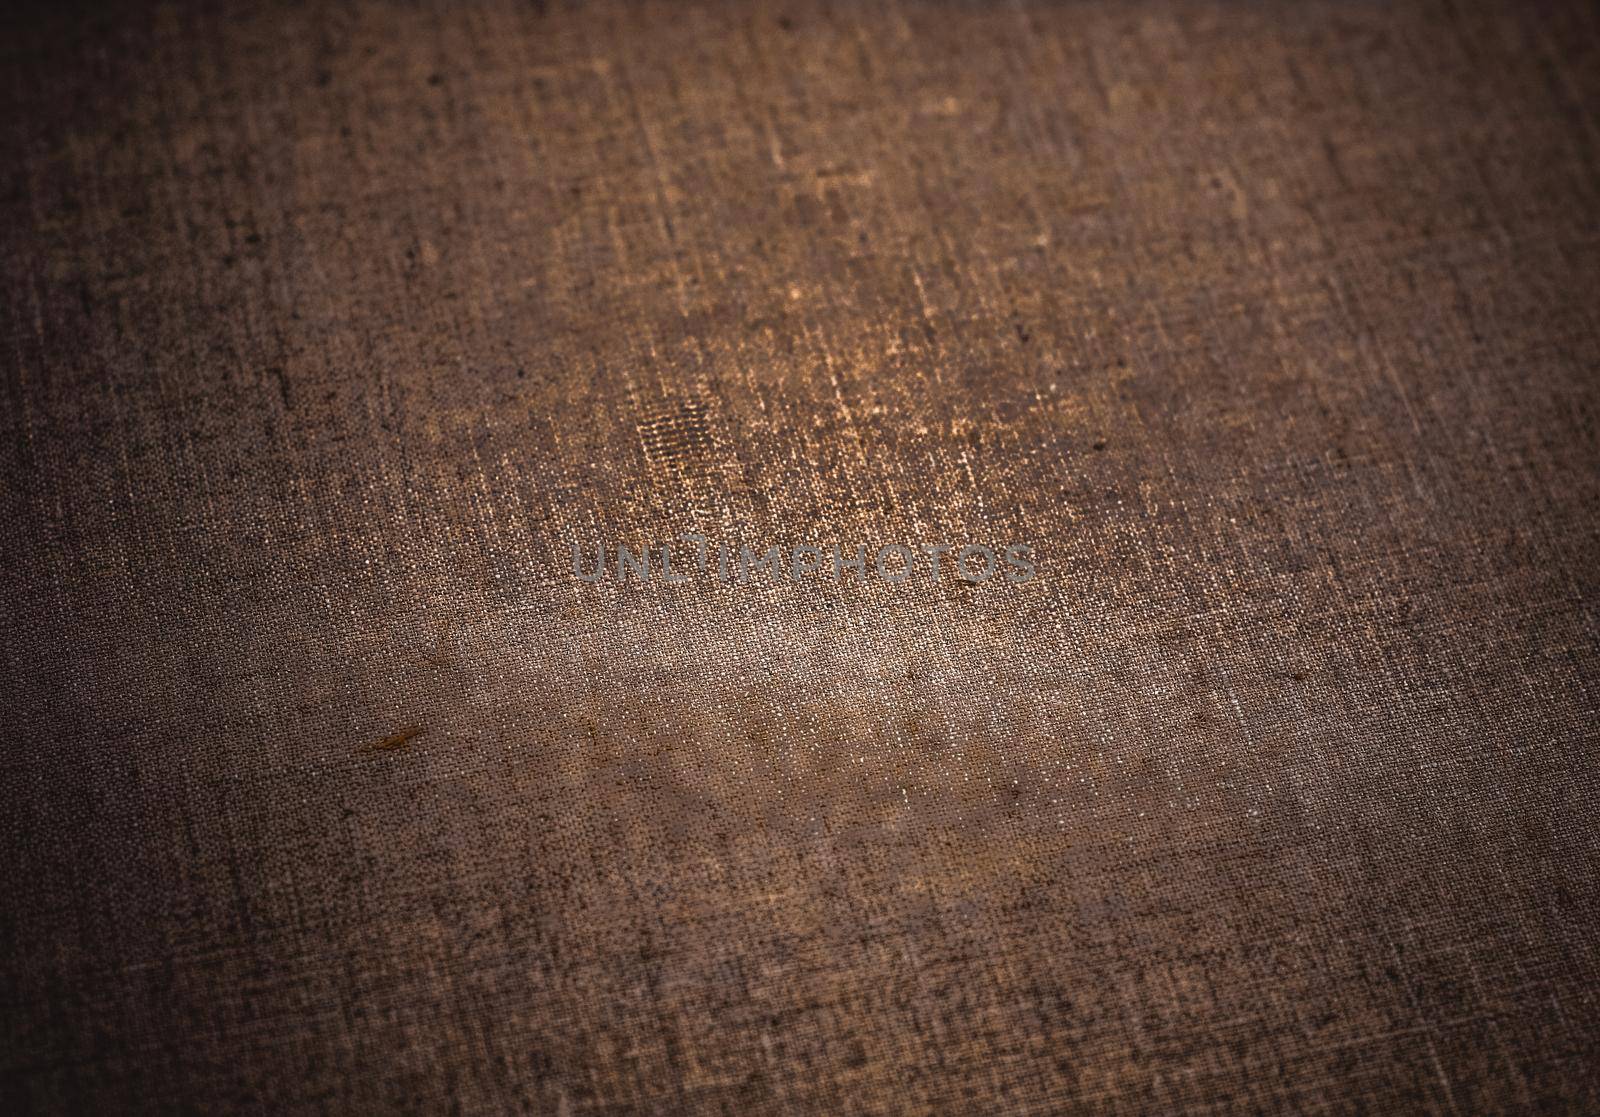 Textile material, natural surface and vintage decor texture concept - Decorative old vintage linen fabric textured background for interior, furniture design and art canvas backdrop